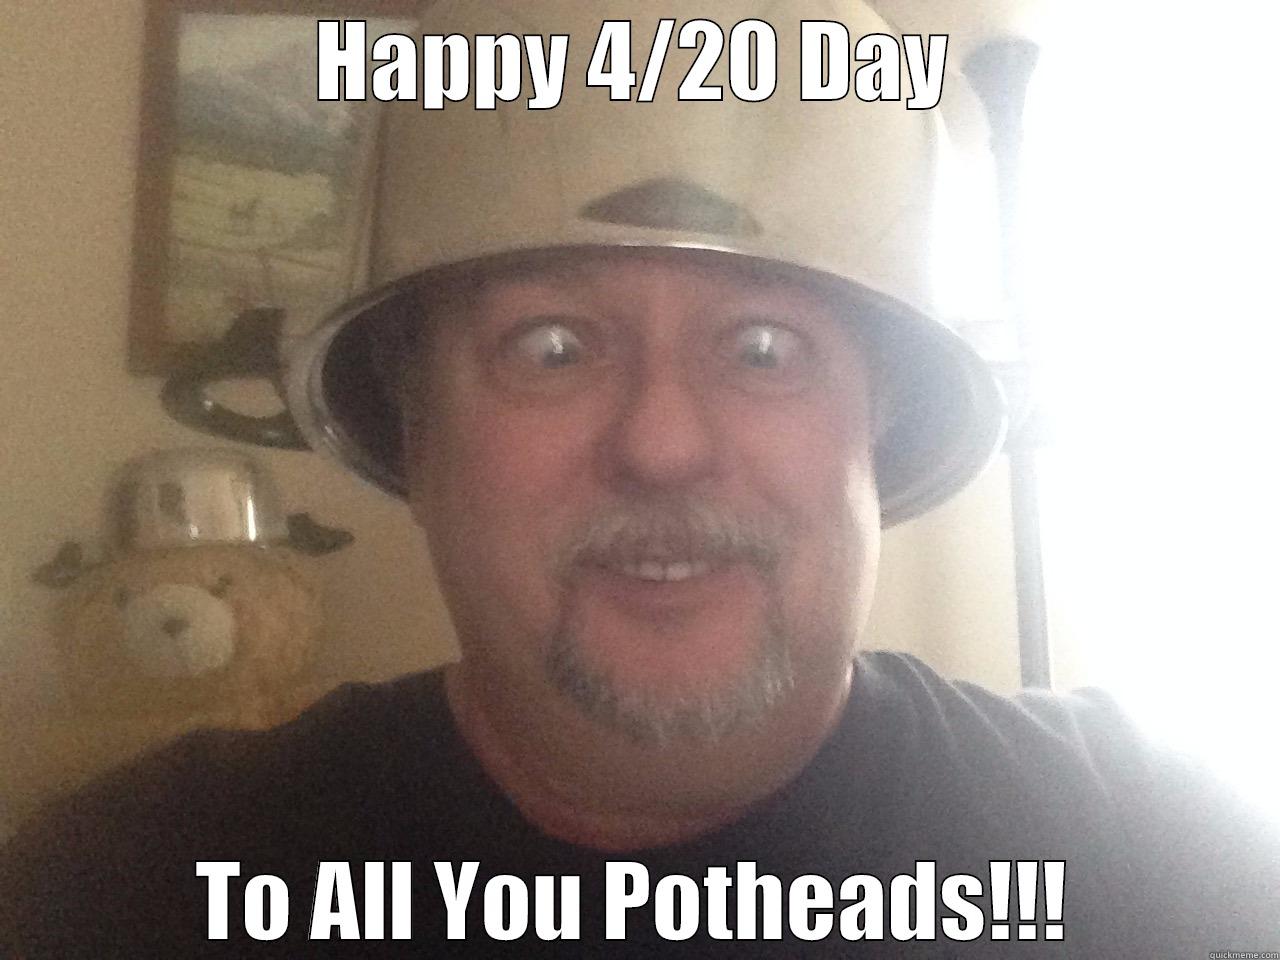 4/20 Day - HAPPY 4/20 DAY TO ALL YOU POTHEADS!!! Misc